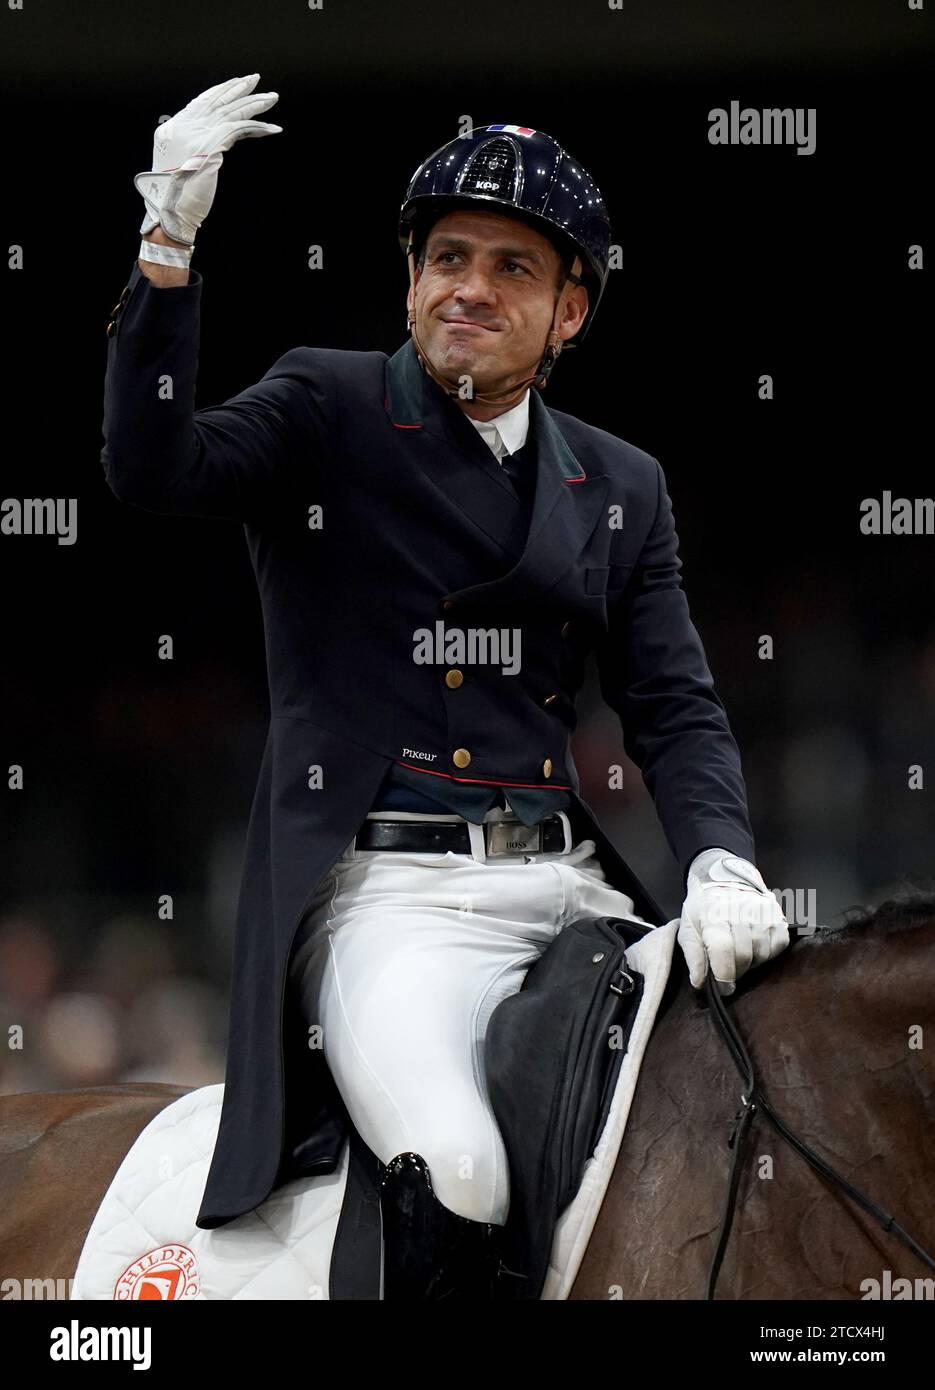 Jolene ridden by France's Alexandre Ayache reacts following their performance during the FEI Dressage World Cup on day two of the London International Horse Show at ExCel London. Picture date: Thursday December 14, 2023. Stock Photo